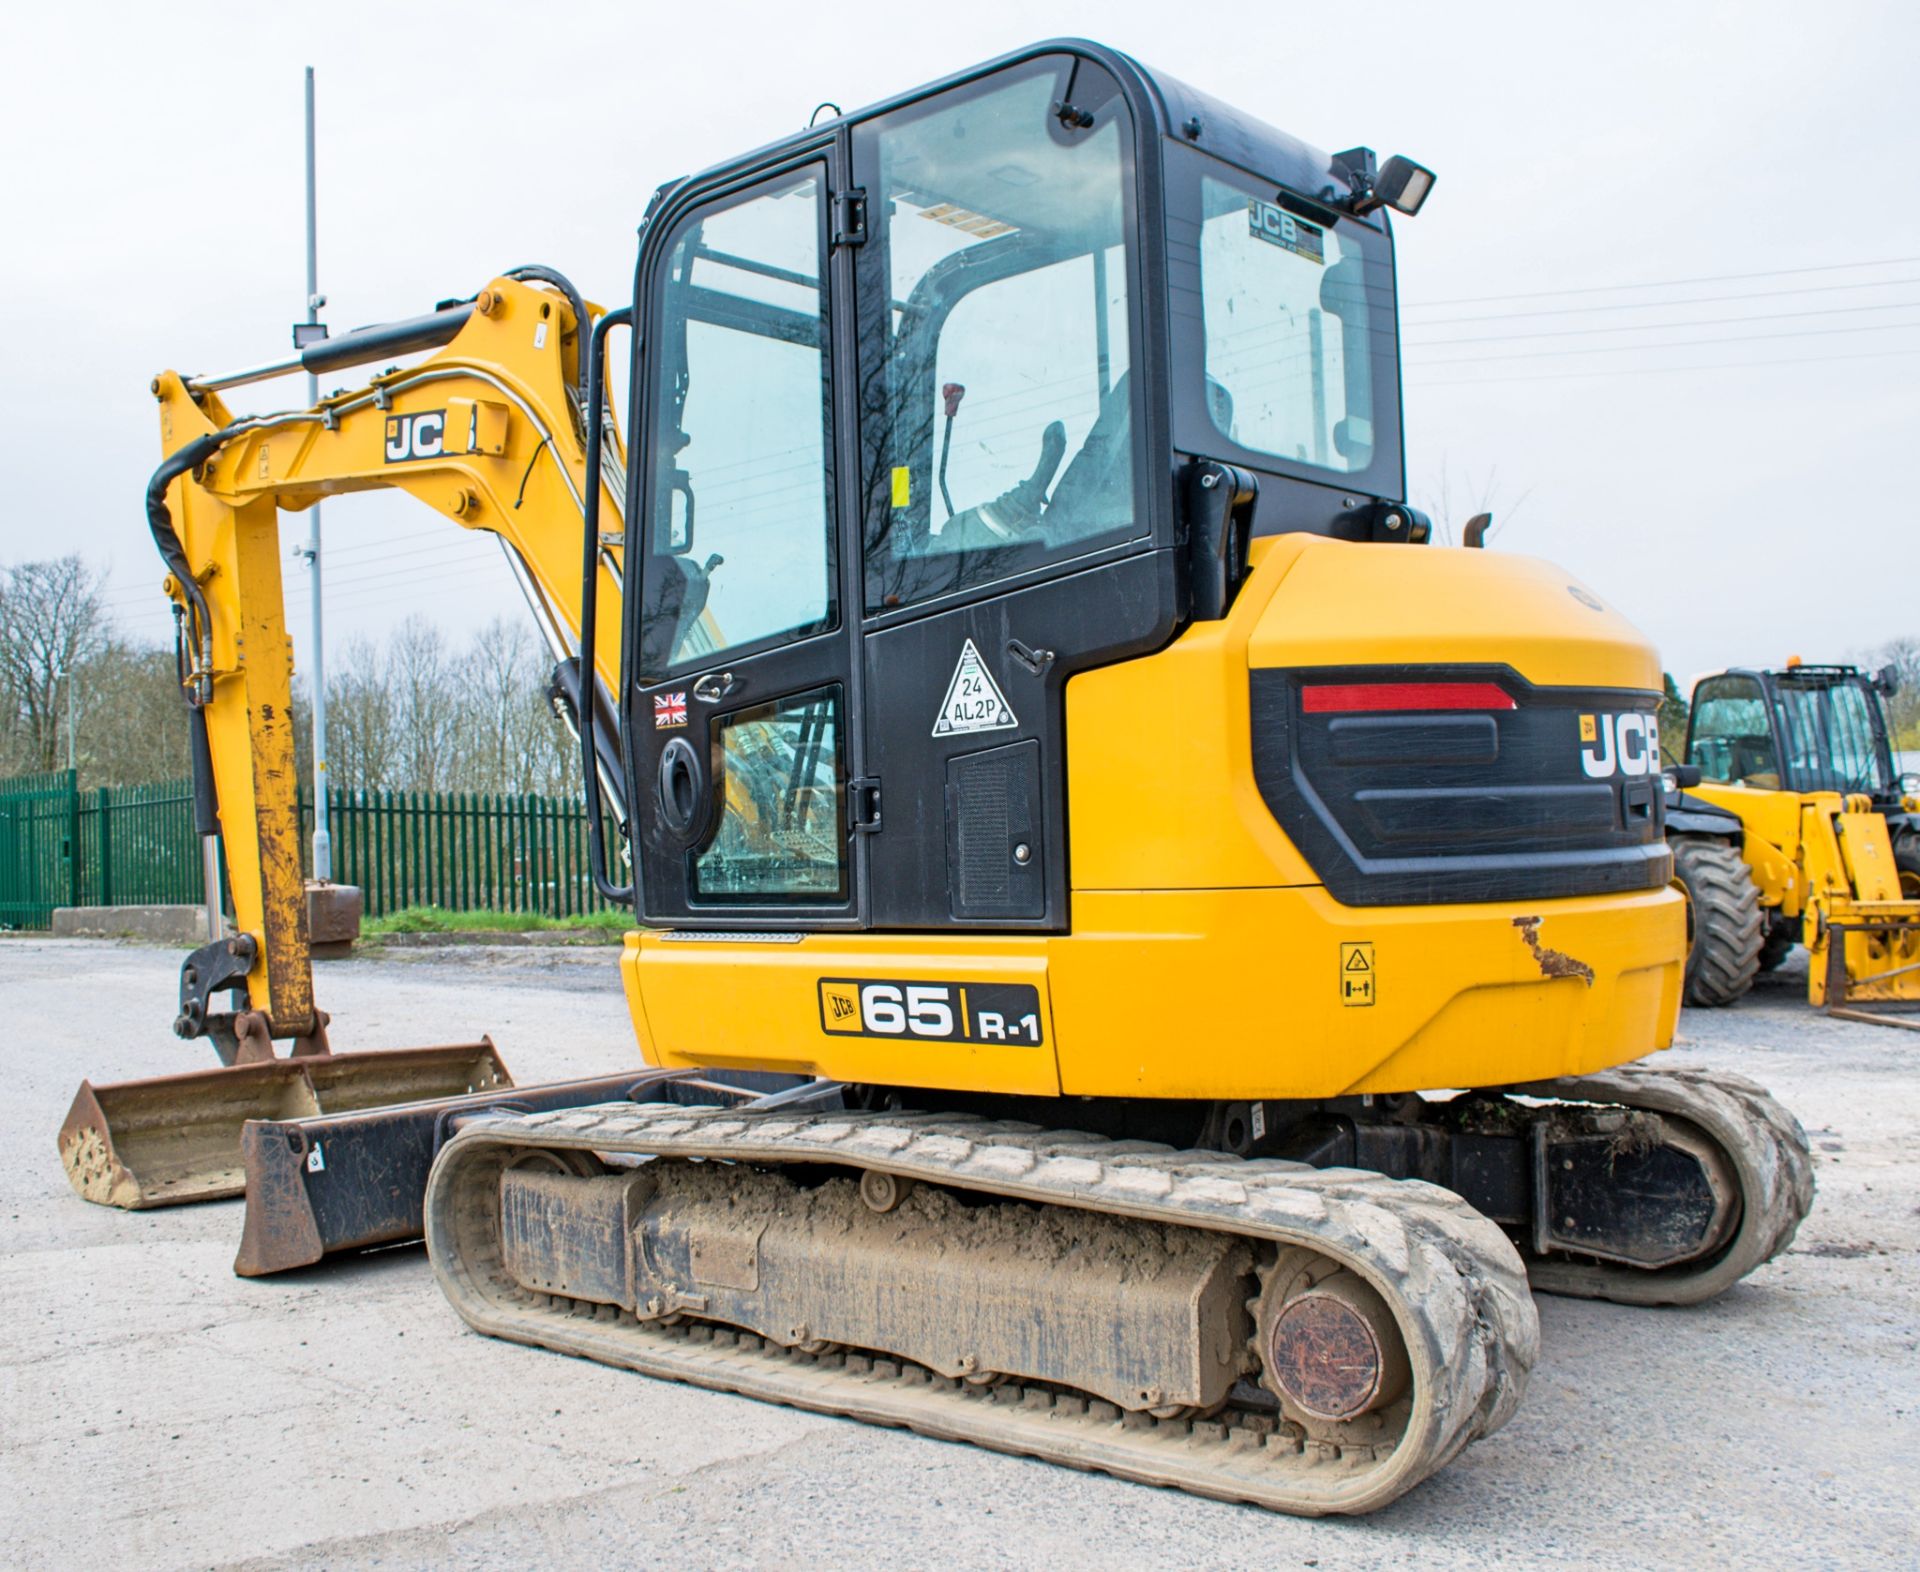 JCB 65R-1 6.5 tonne rubber tracked excavator Year: 2015 S/N: 1913919 Recorded Hours: 1886 blade, - Image 3 of 12